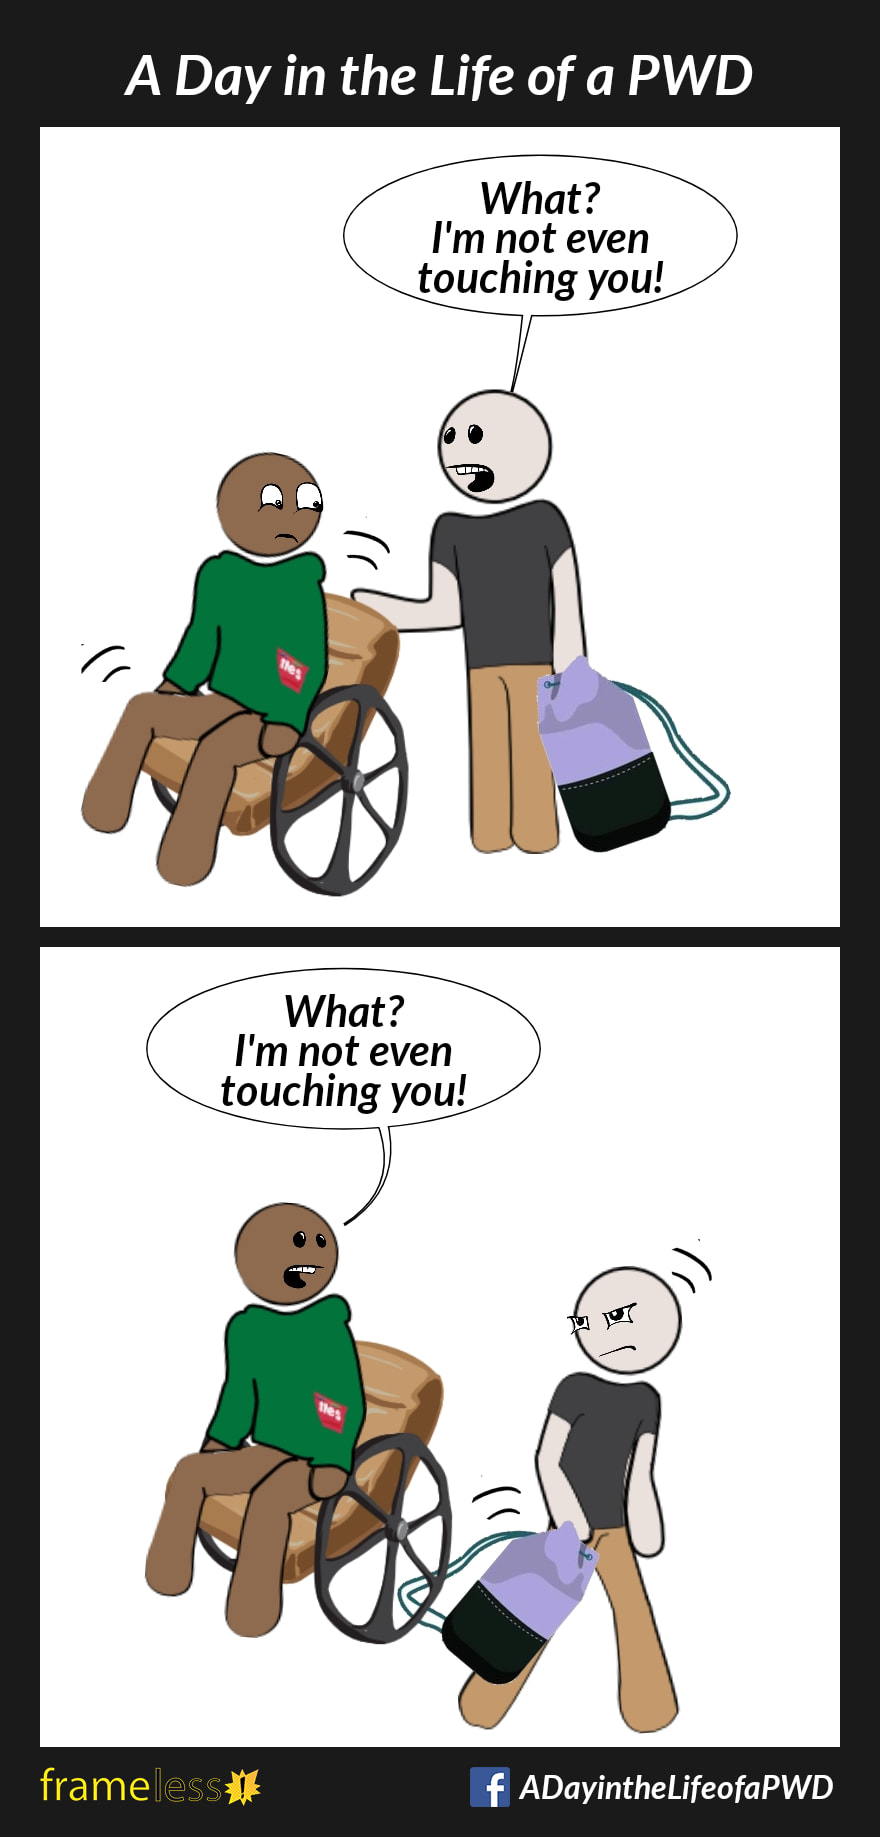 COMIC STRIP 
A Day in the Life of a PWD (Person With a Disability) 

Frame 1:
A man is disturbed by a stranger touching the back of his wheelchair.
STRANGER: What? I'm not even touching you!

Frame 2:
The stranger tries to walk away, but the strap of his bag is caught under the man's wheelchair wheel.
MAN: What? I'm not even touching you!